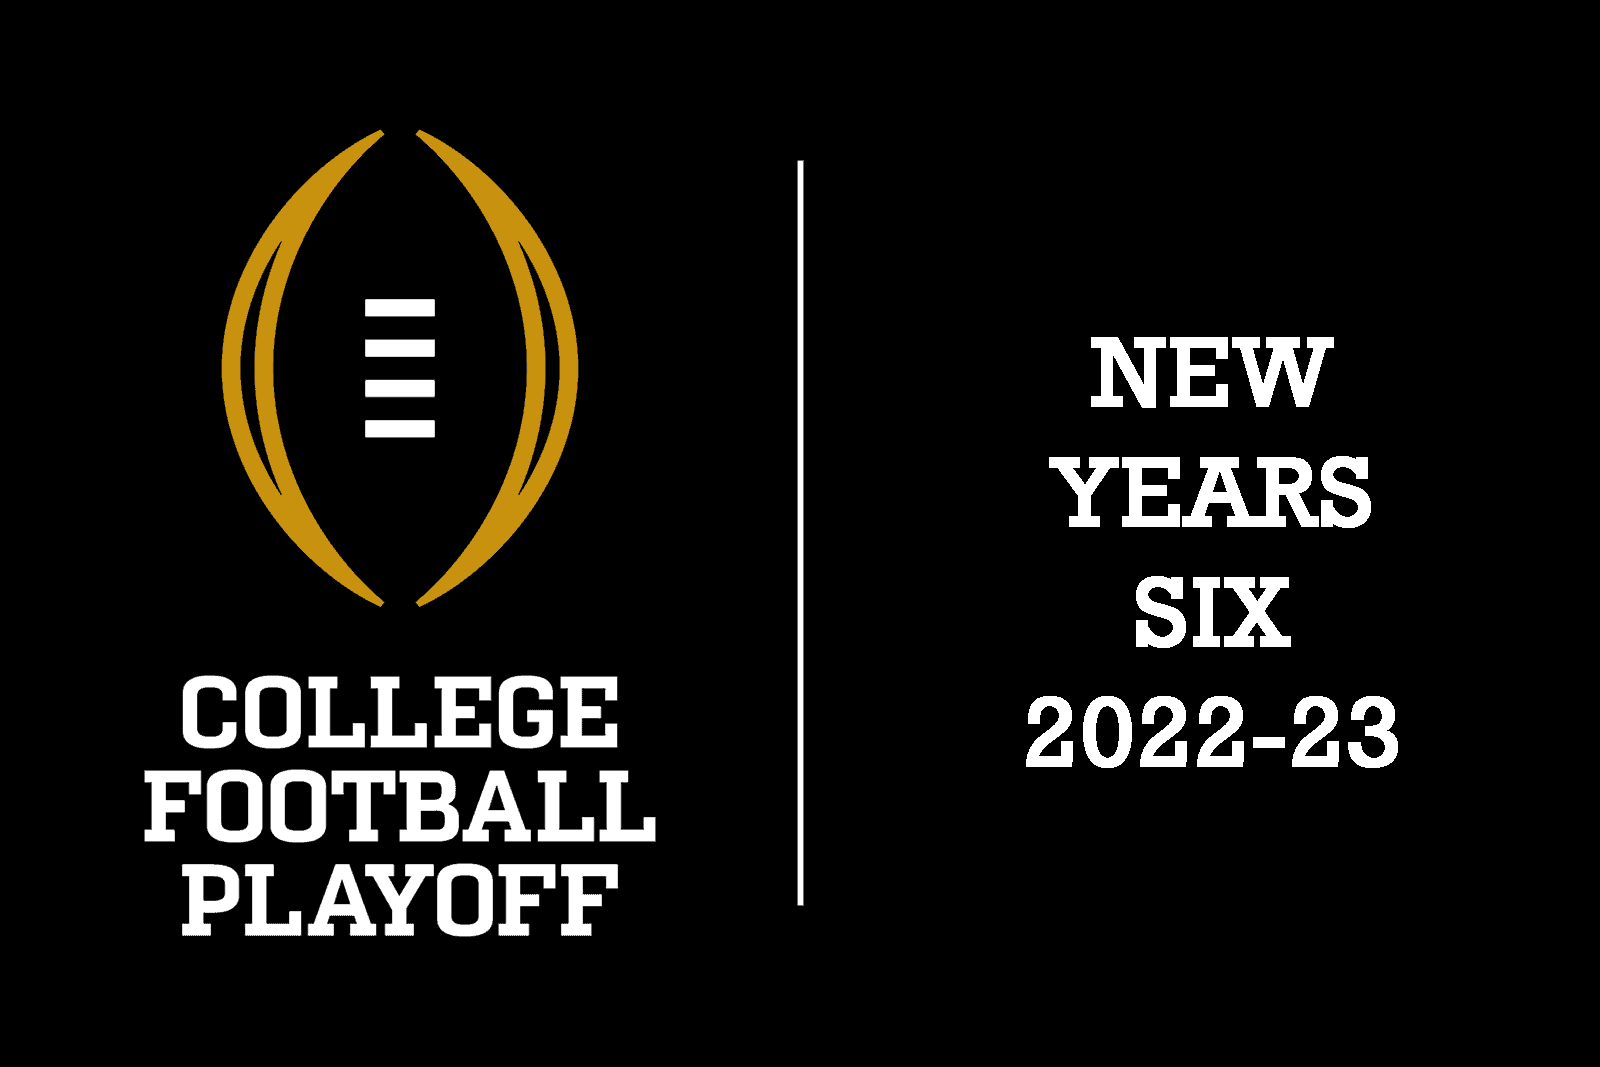 College Football Playoff: 2022-23 New Year's Six